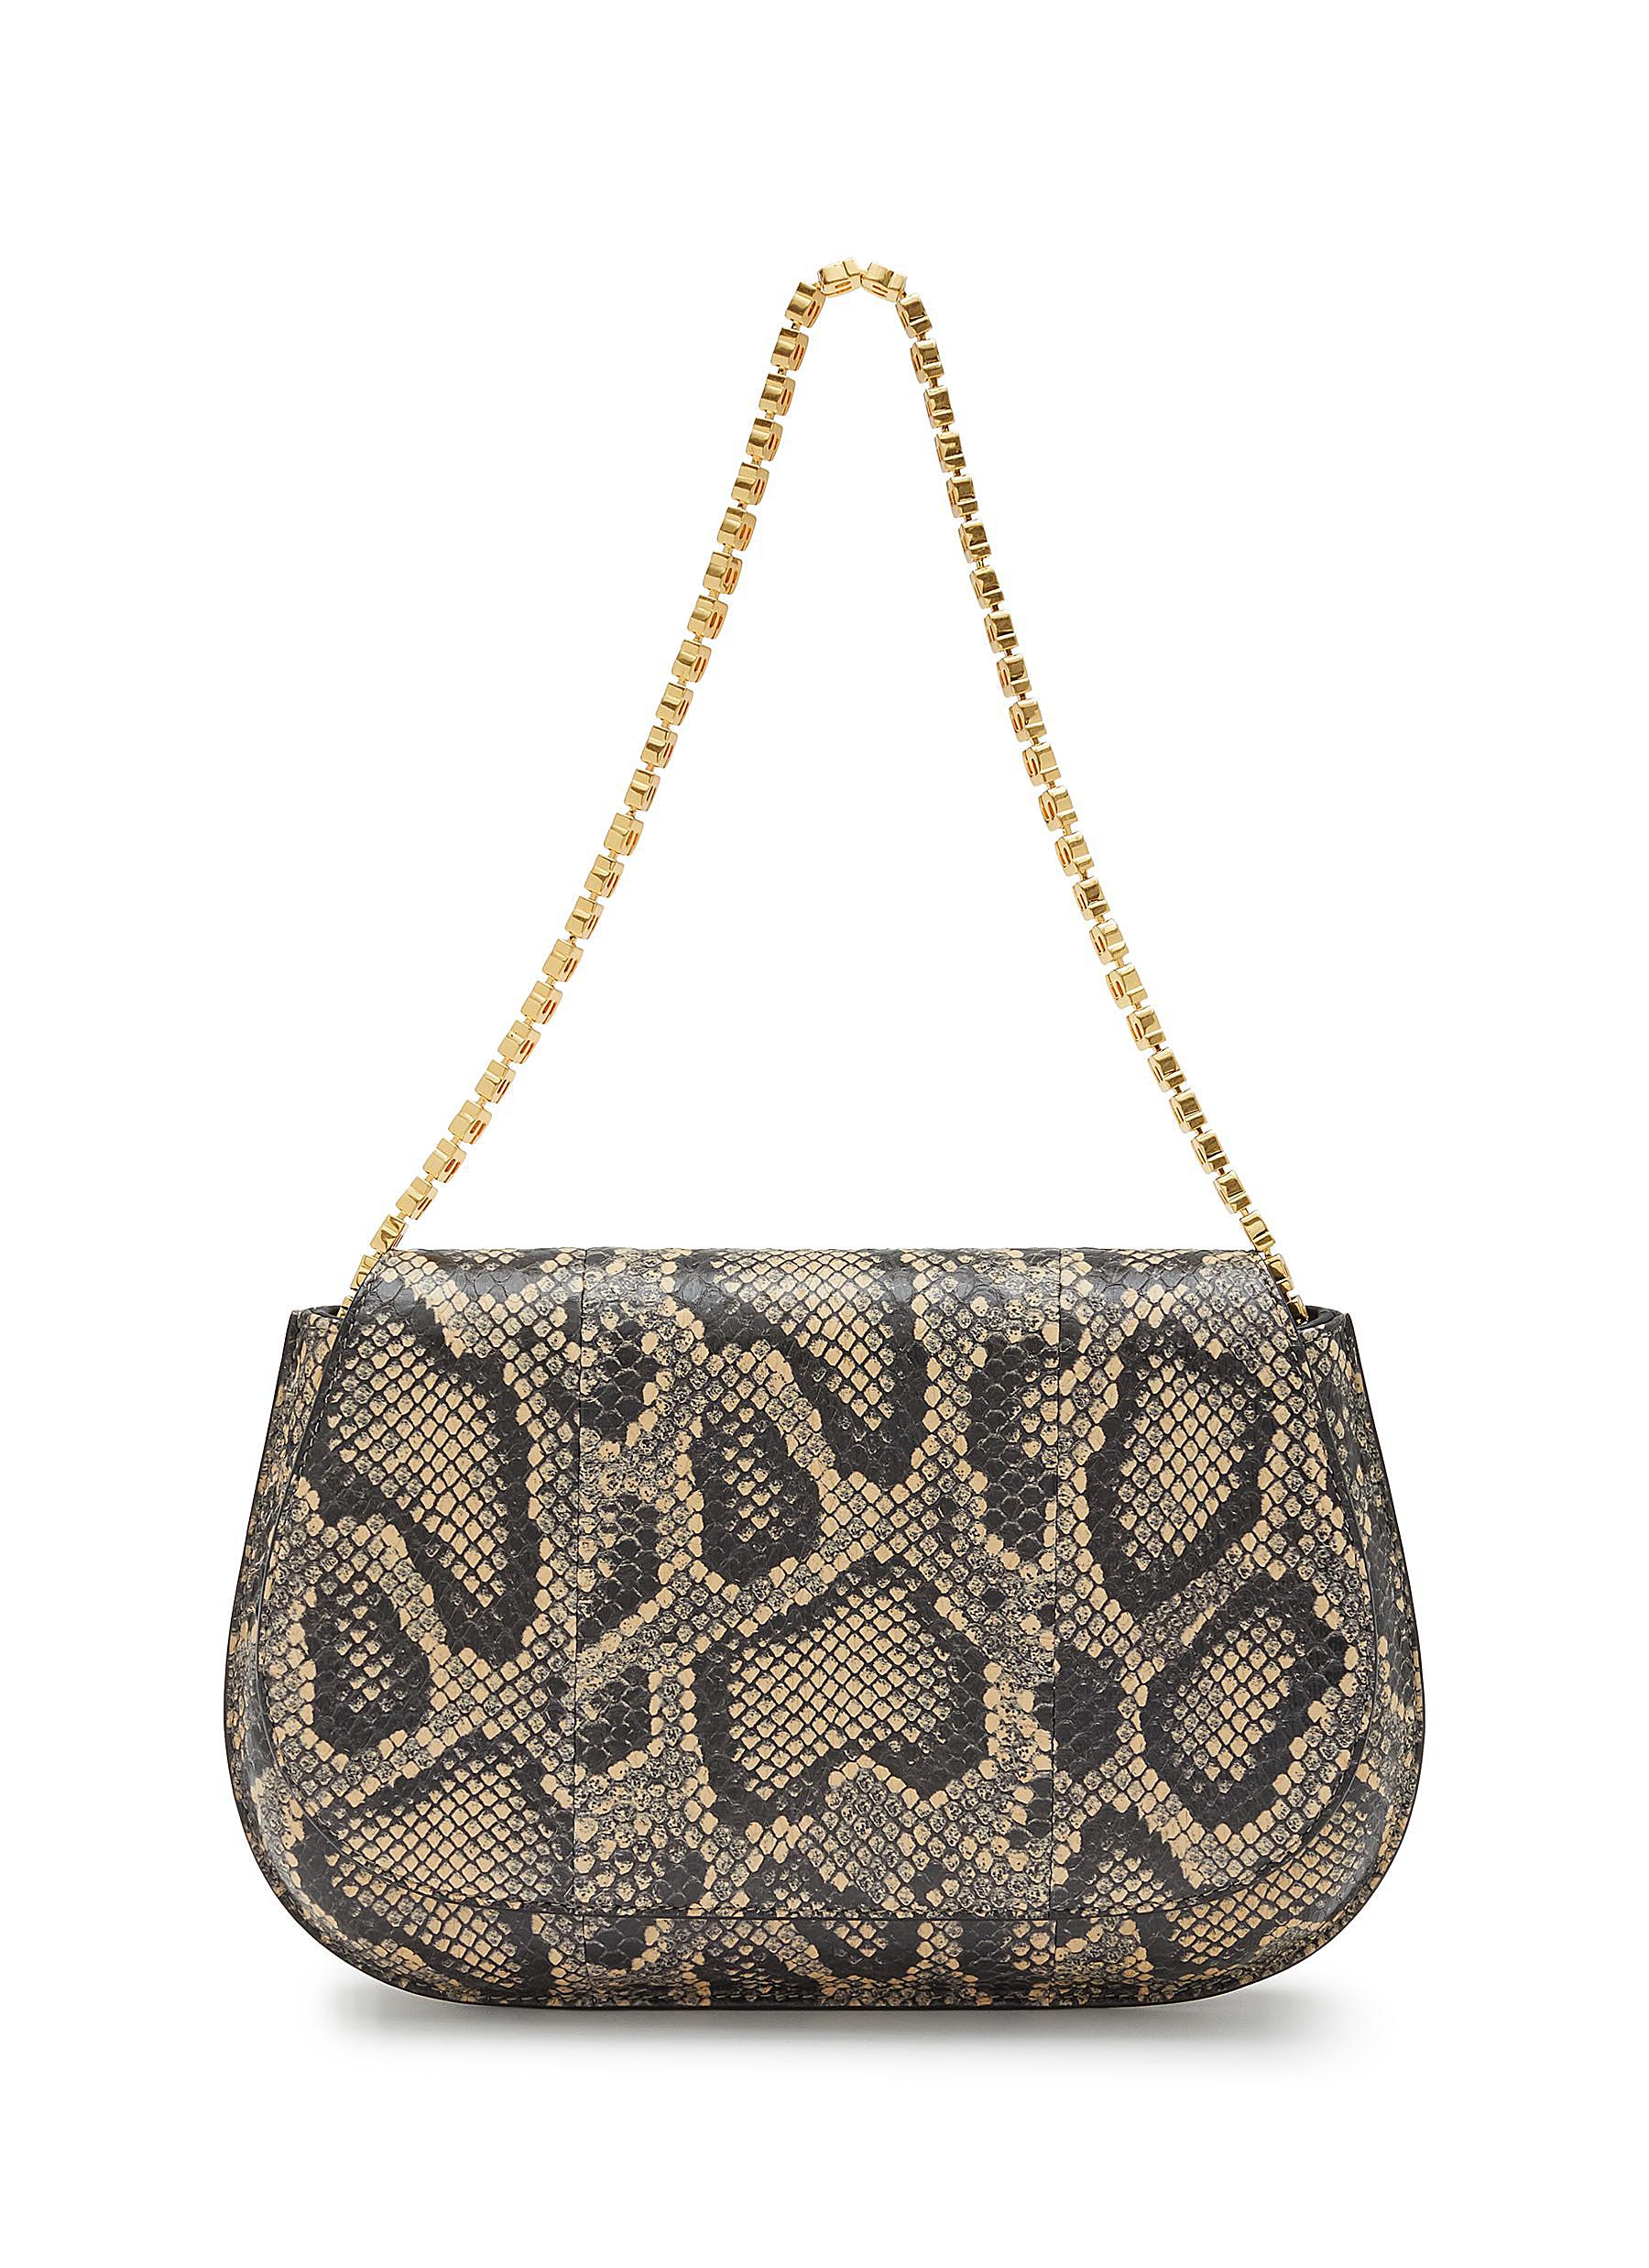 Crest ’A’ Chain Snakeskin Leather Bag